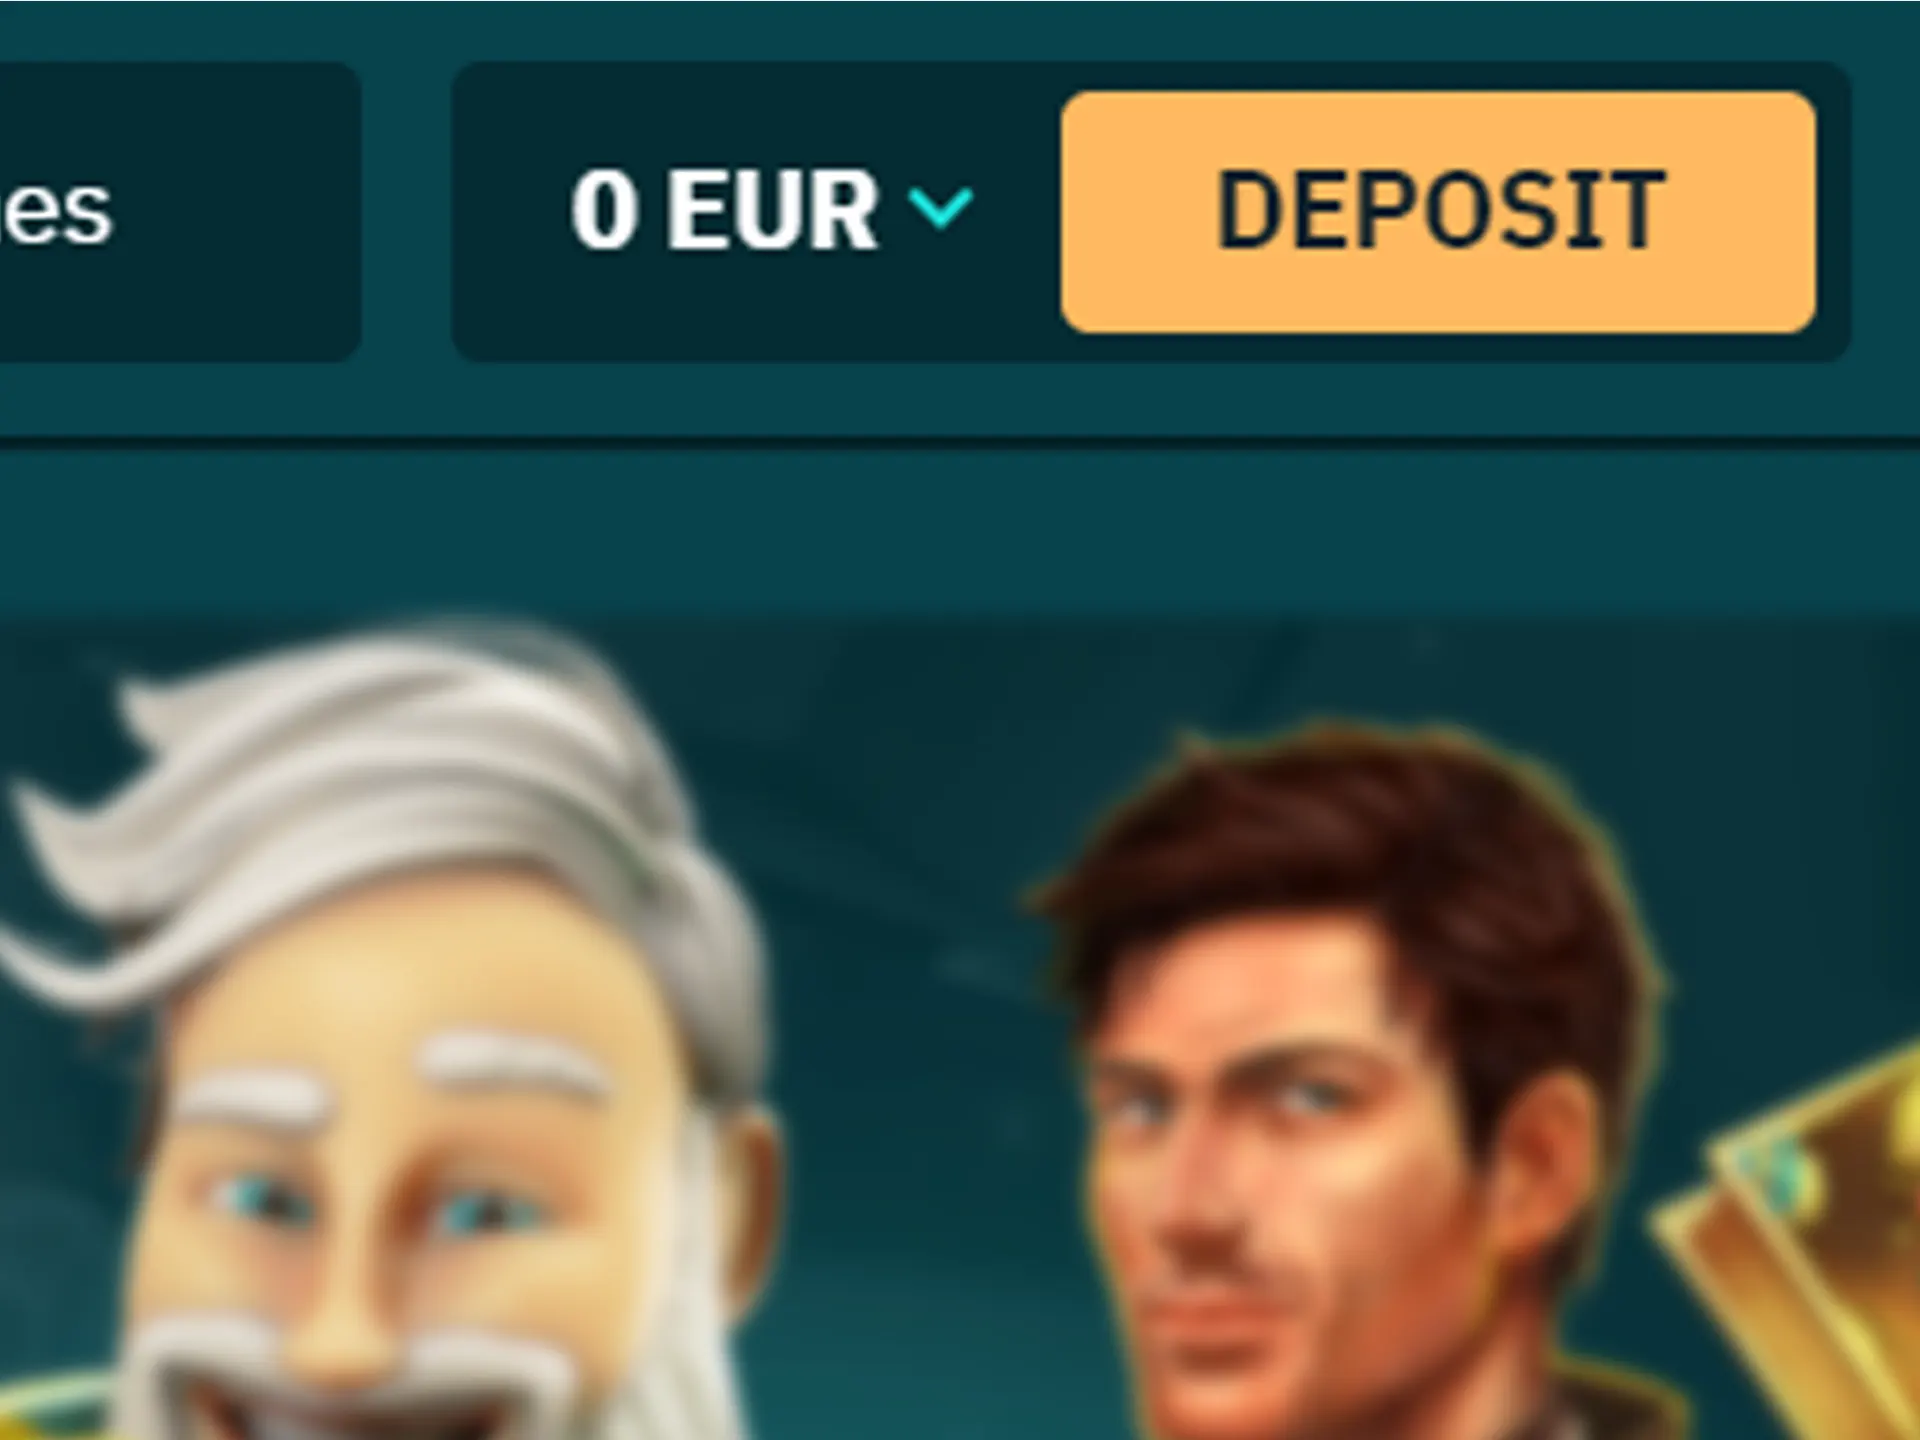 Click on deposit button.